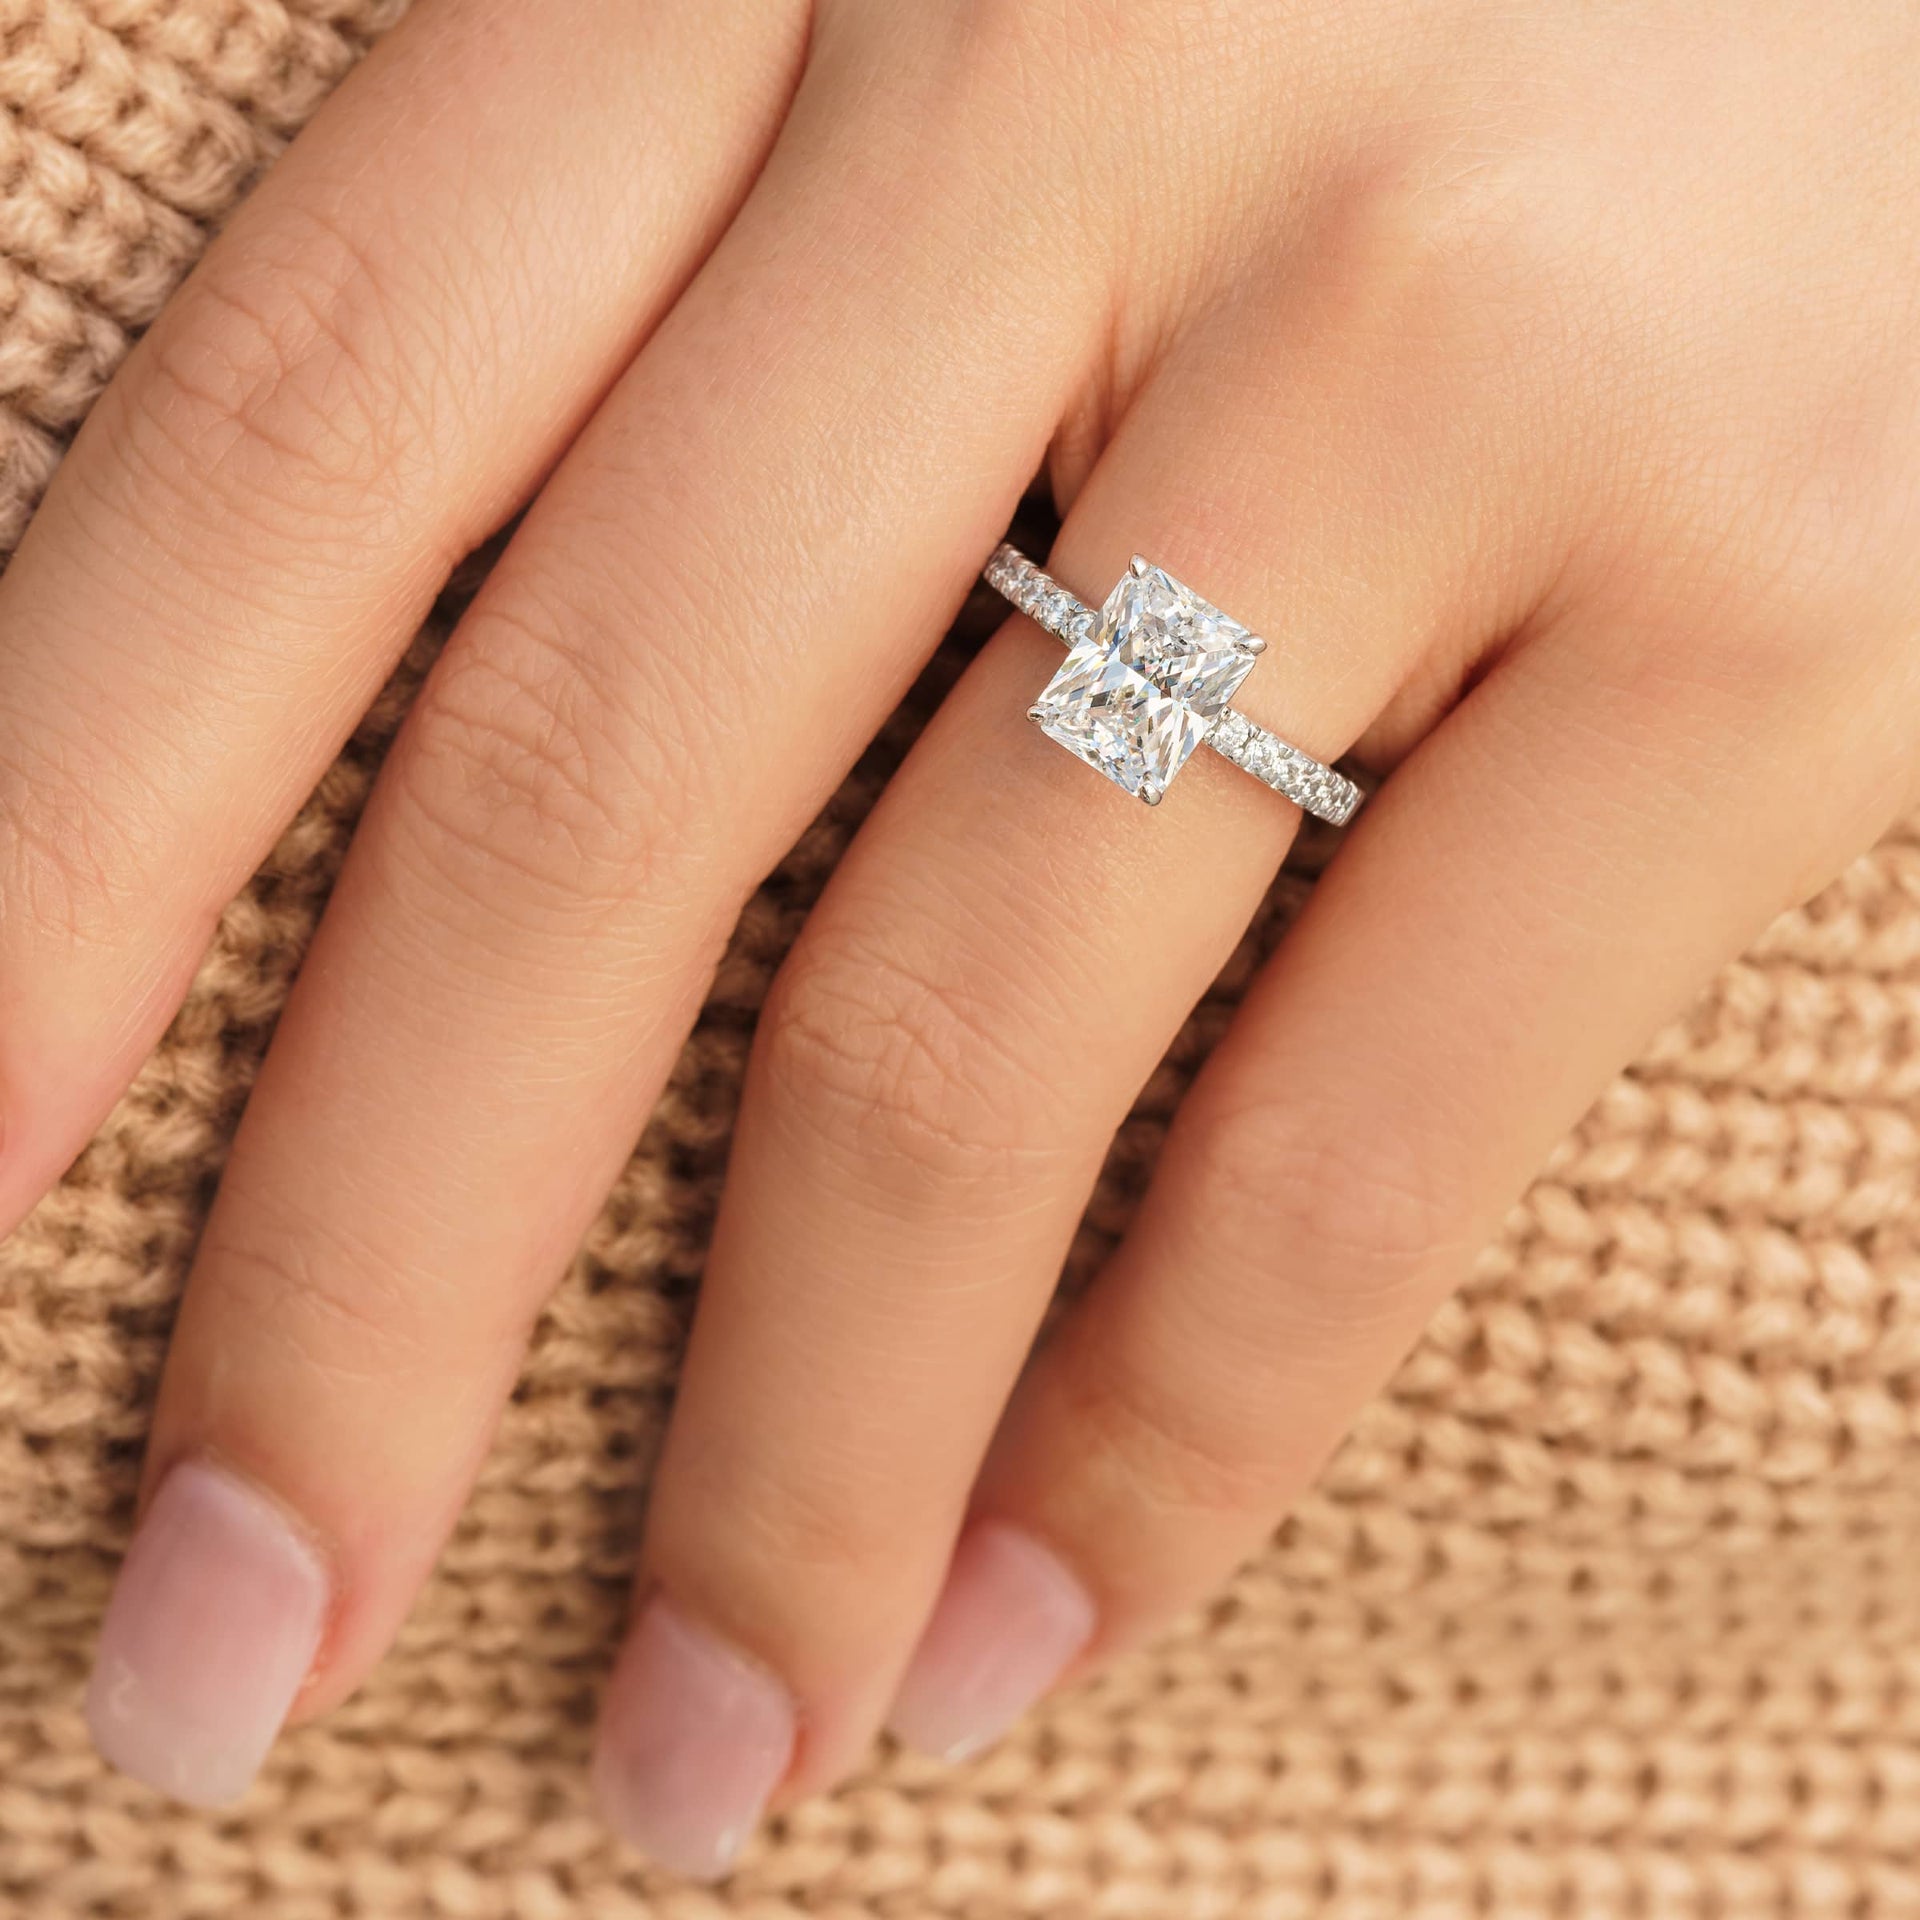 Gorgeous silver radiant cut engagement ring on female model wearing tan sweater